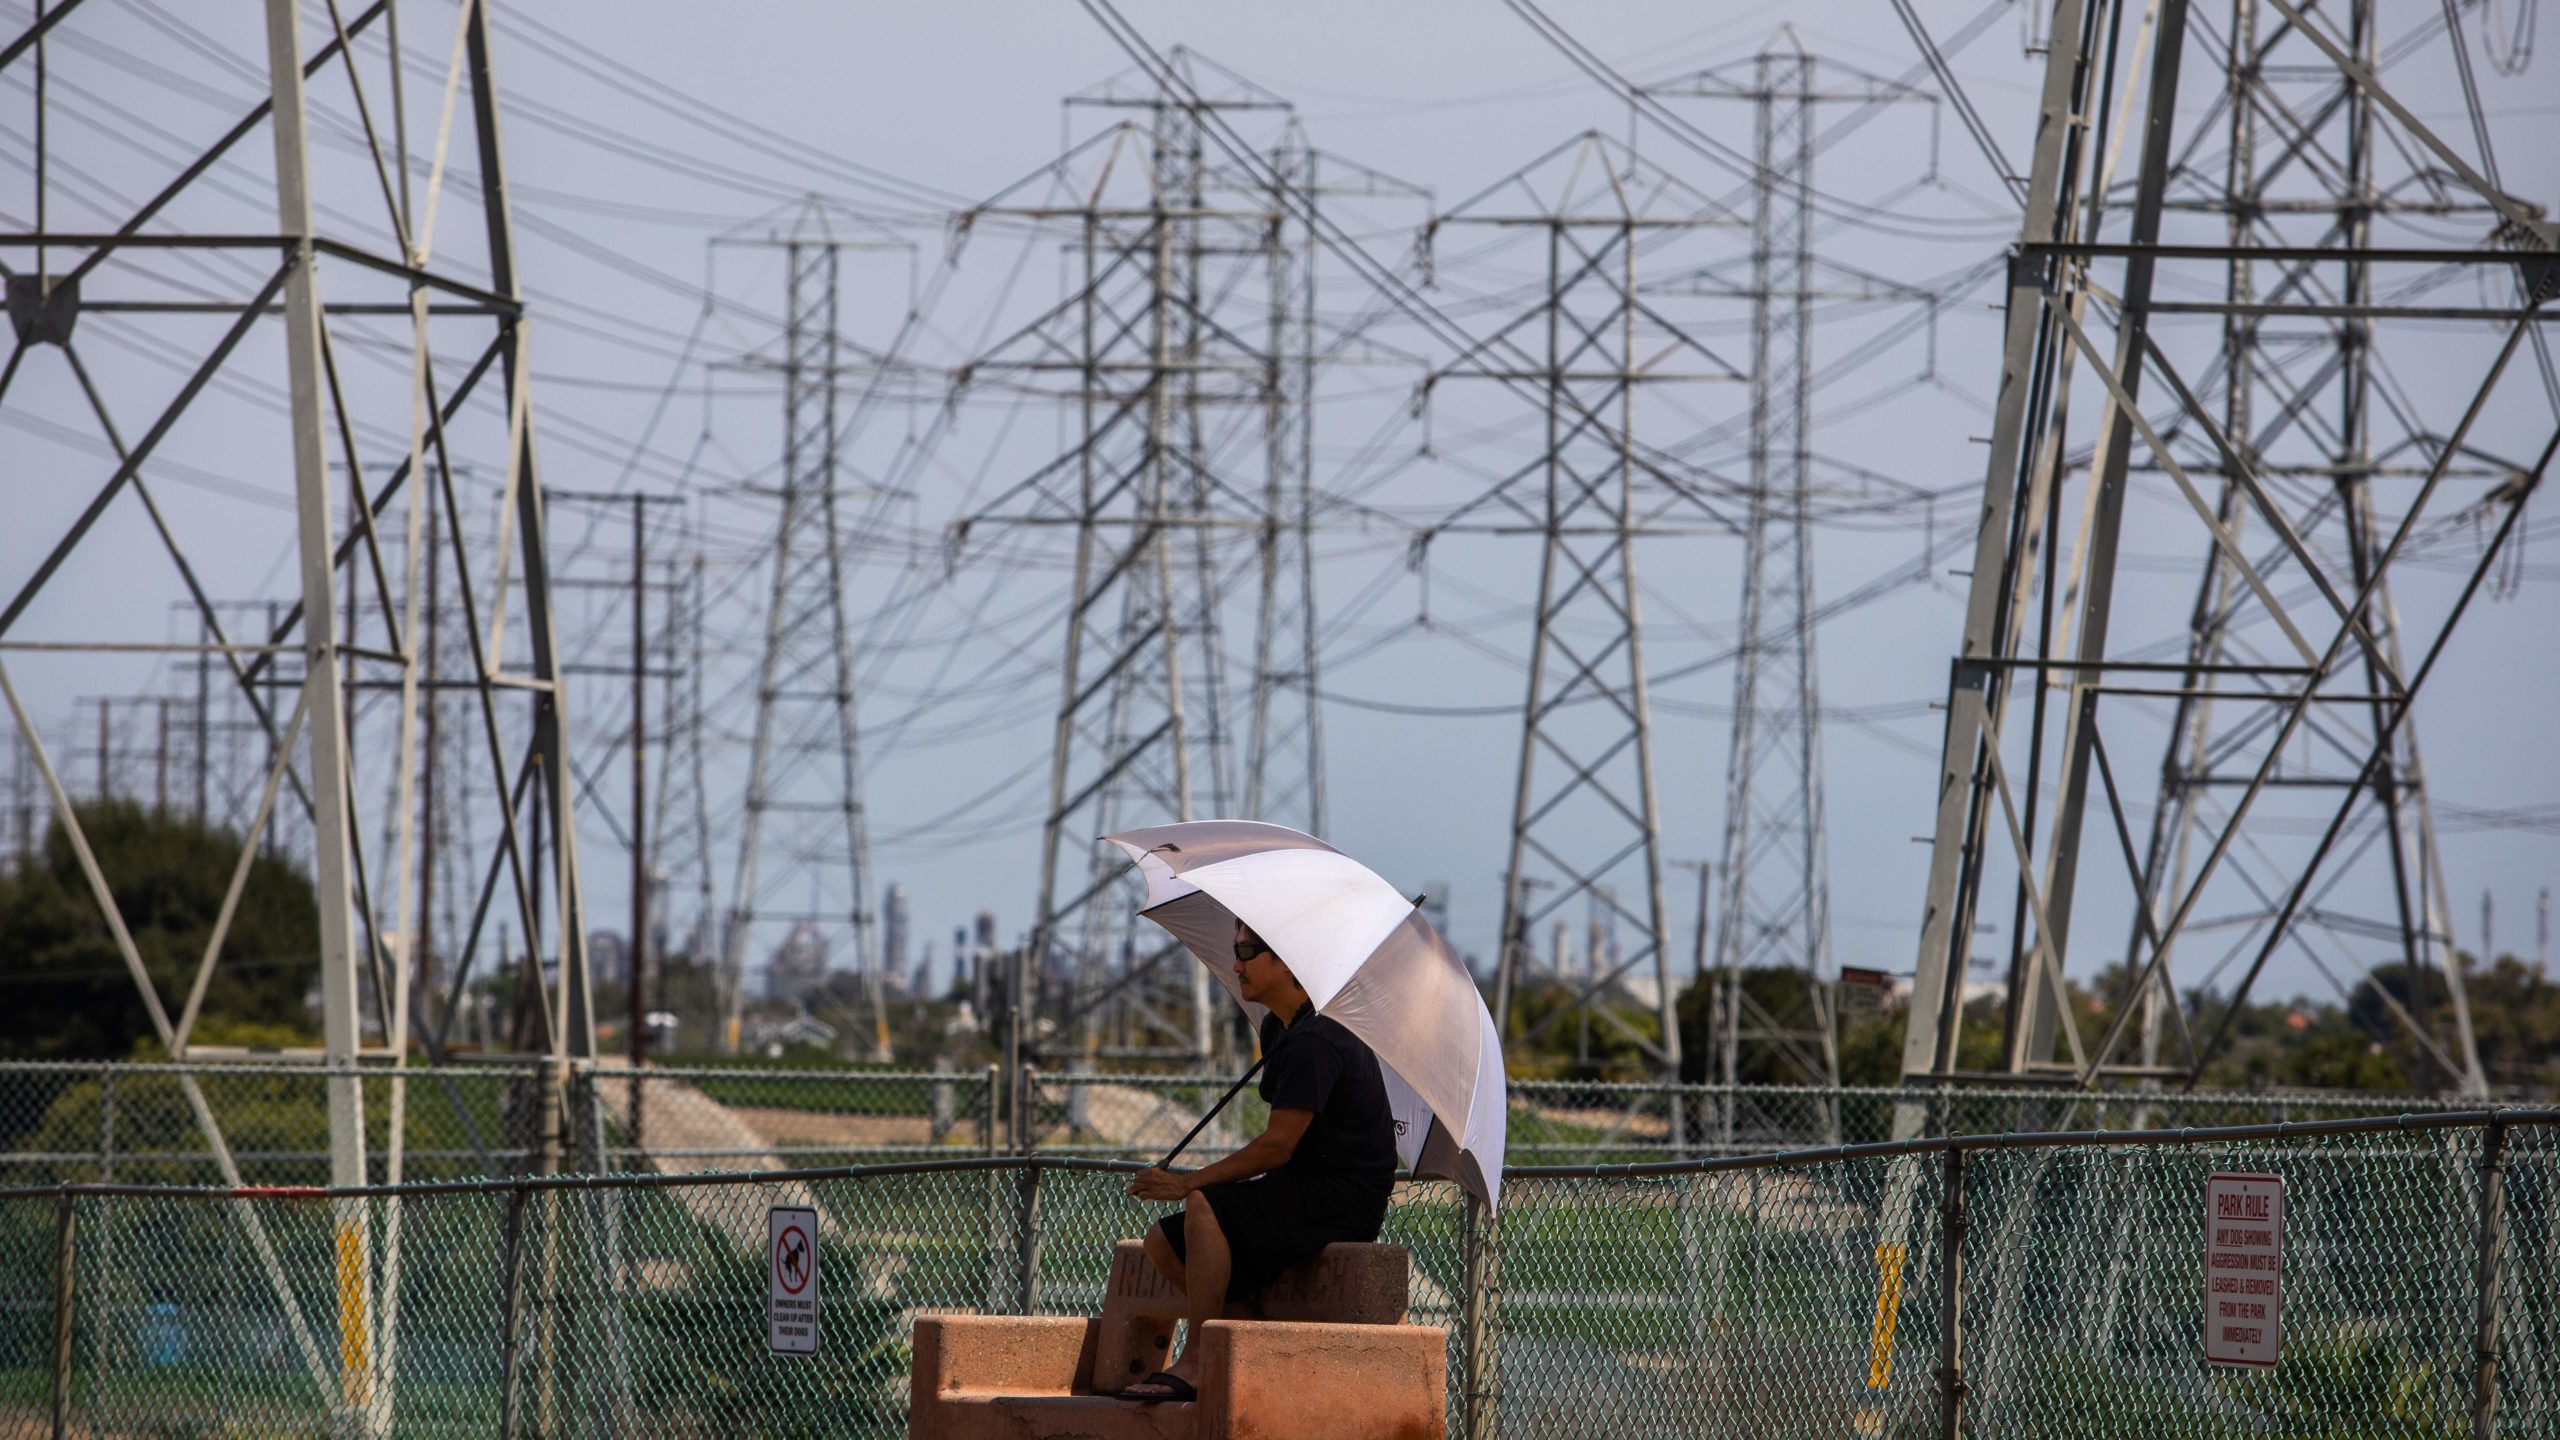 A man sits in the shade of his umbrella at the Dog Park under high tension power lines in Redondo Beach, California on Aug. 16, 2020. California ordered rolling power outages for the first time since 2001 as a statewide heat wave strained its electrical system. (Photo: Apu Gomes/AFP, Getty Images)